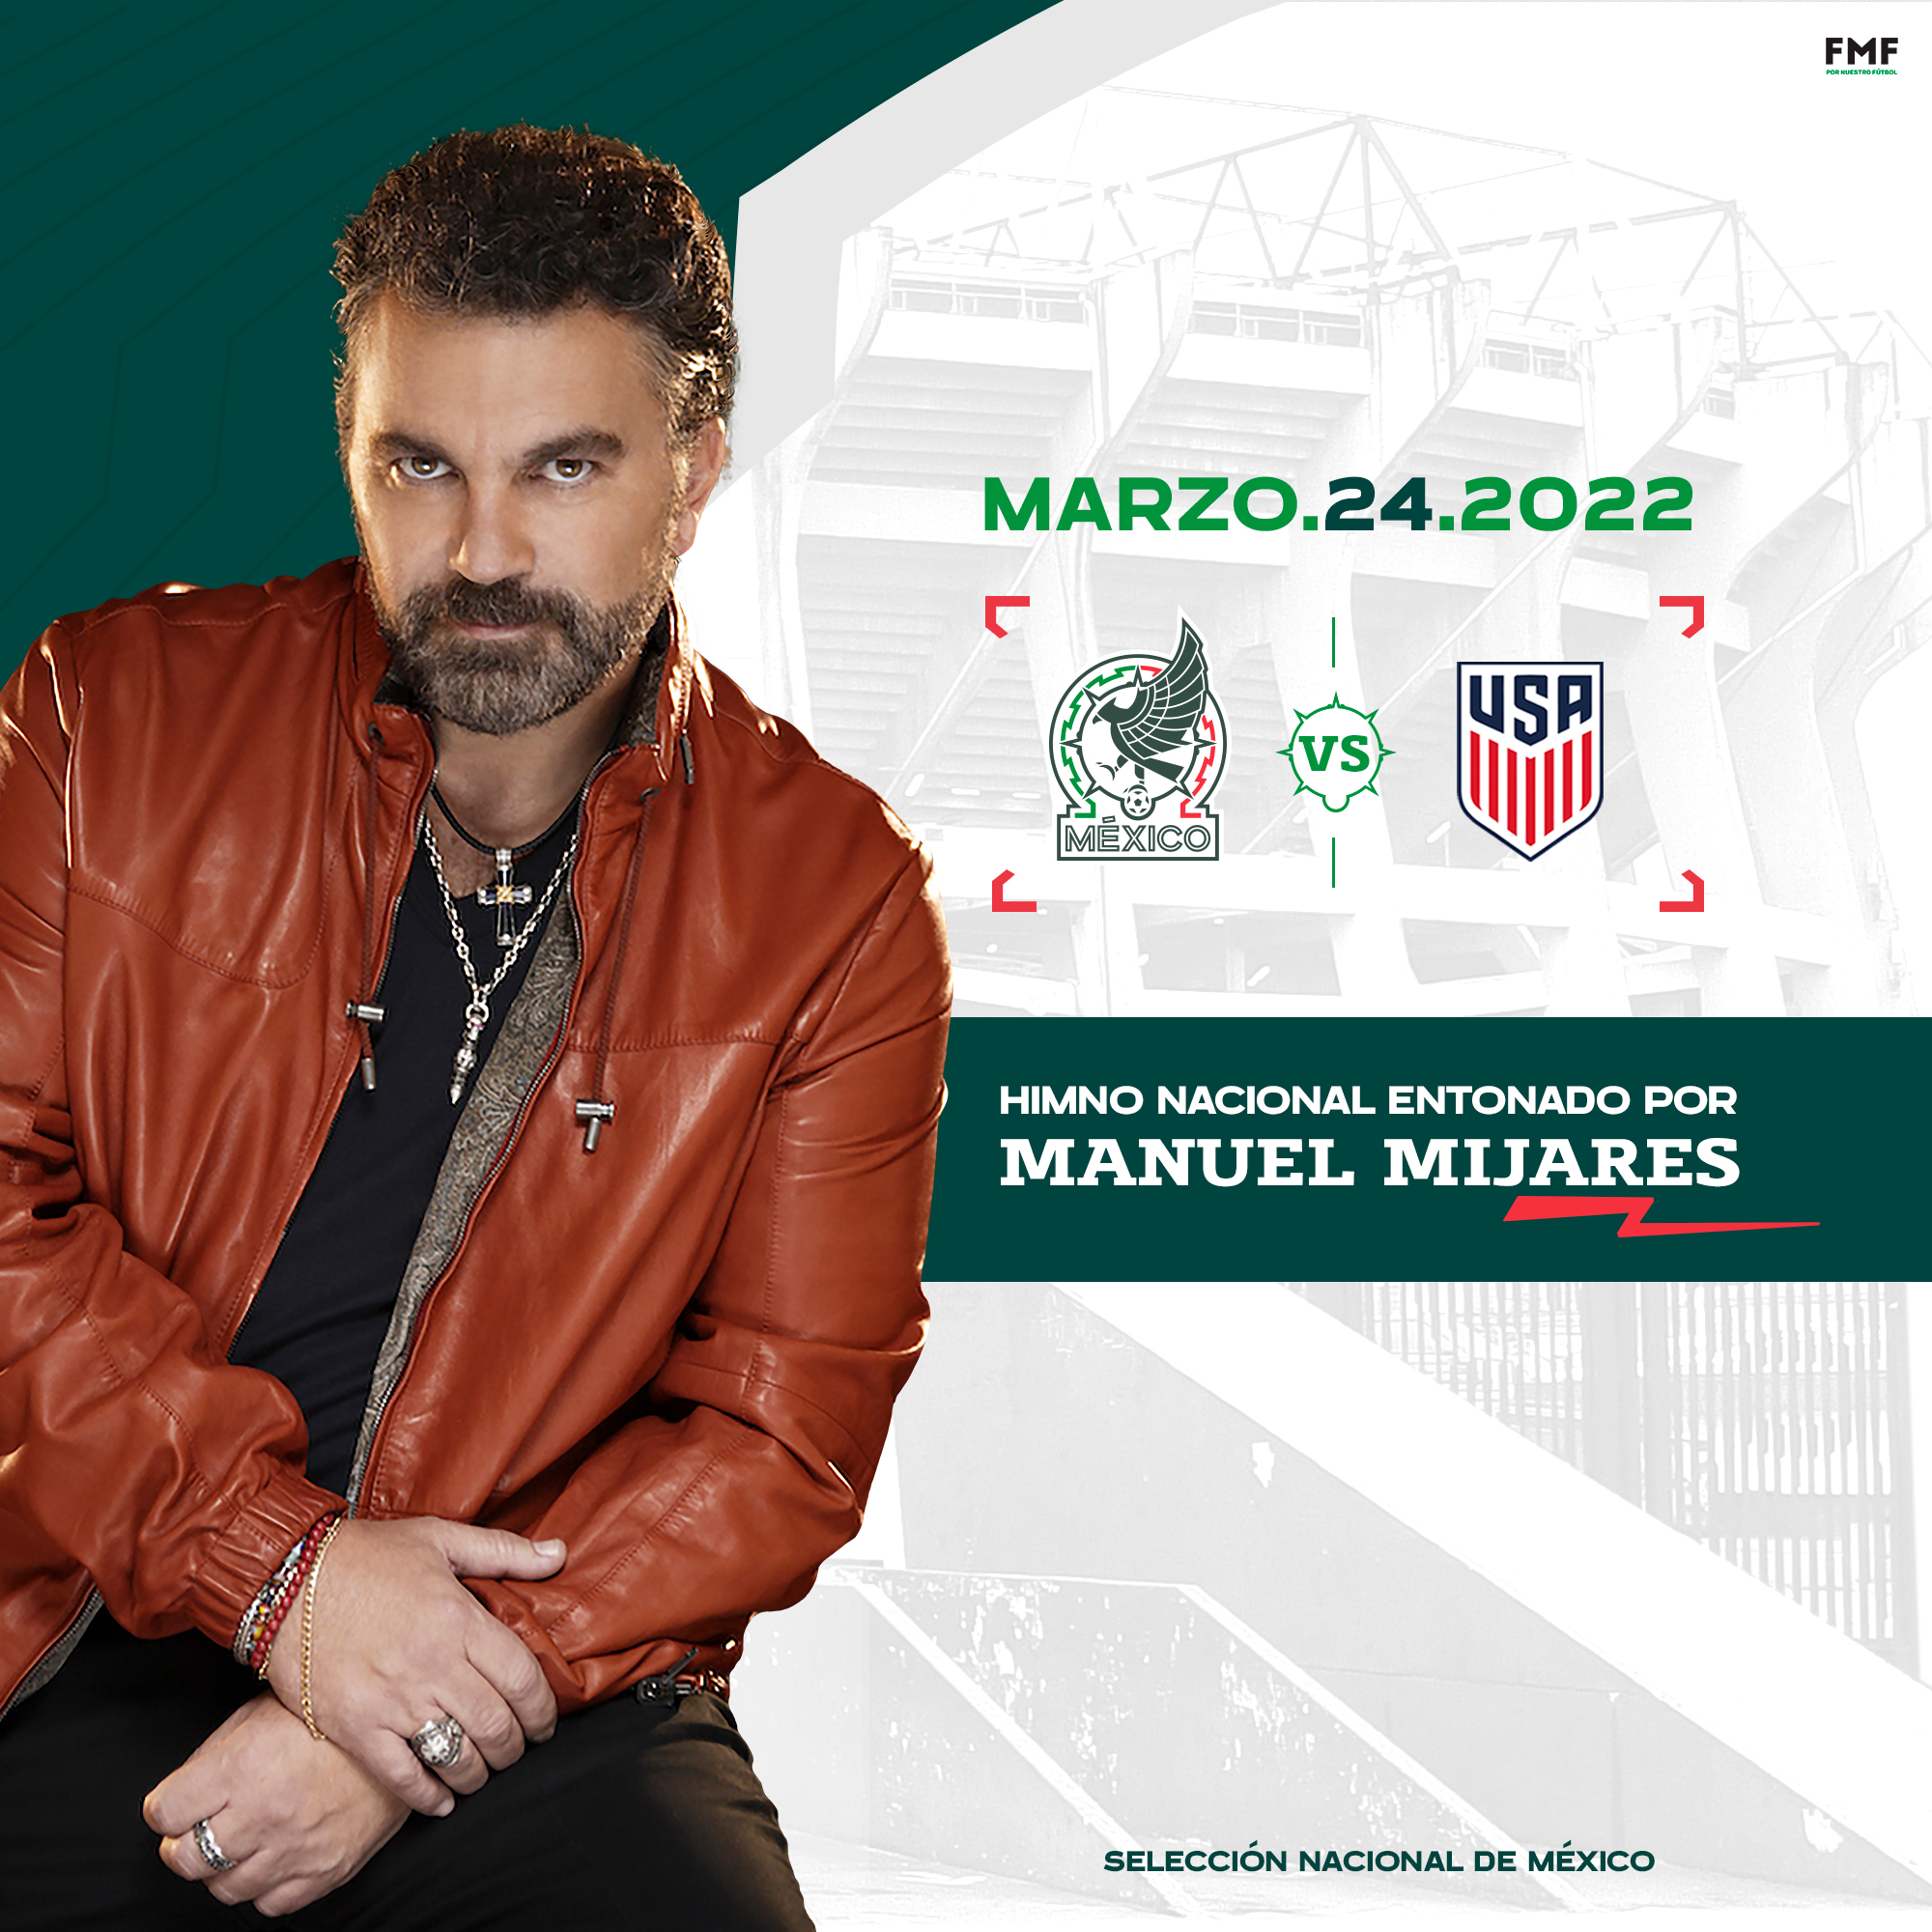 Manuel Mijares sang the anthem in the Mexico vs. USA match (Photo: Twitter/@miseleccionmx)